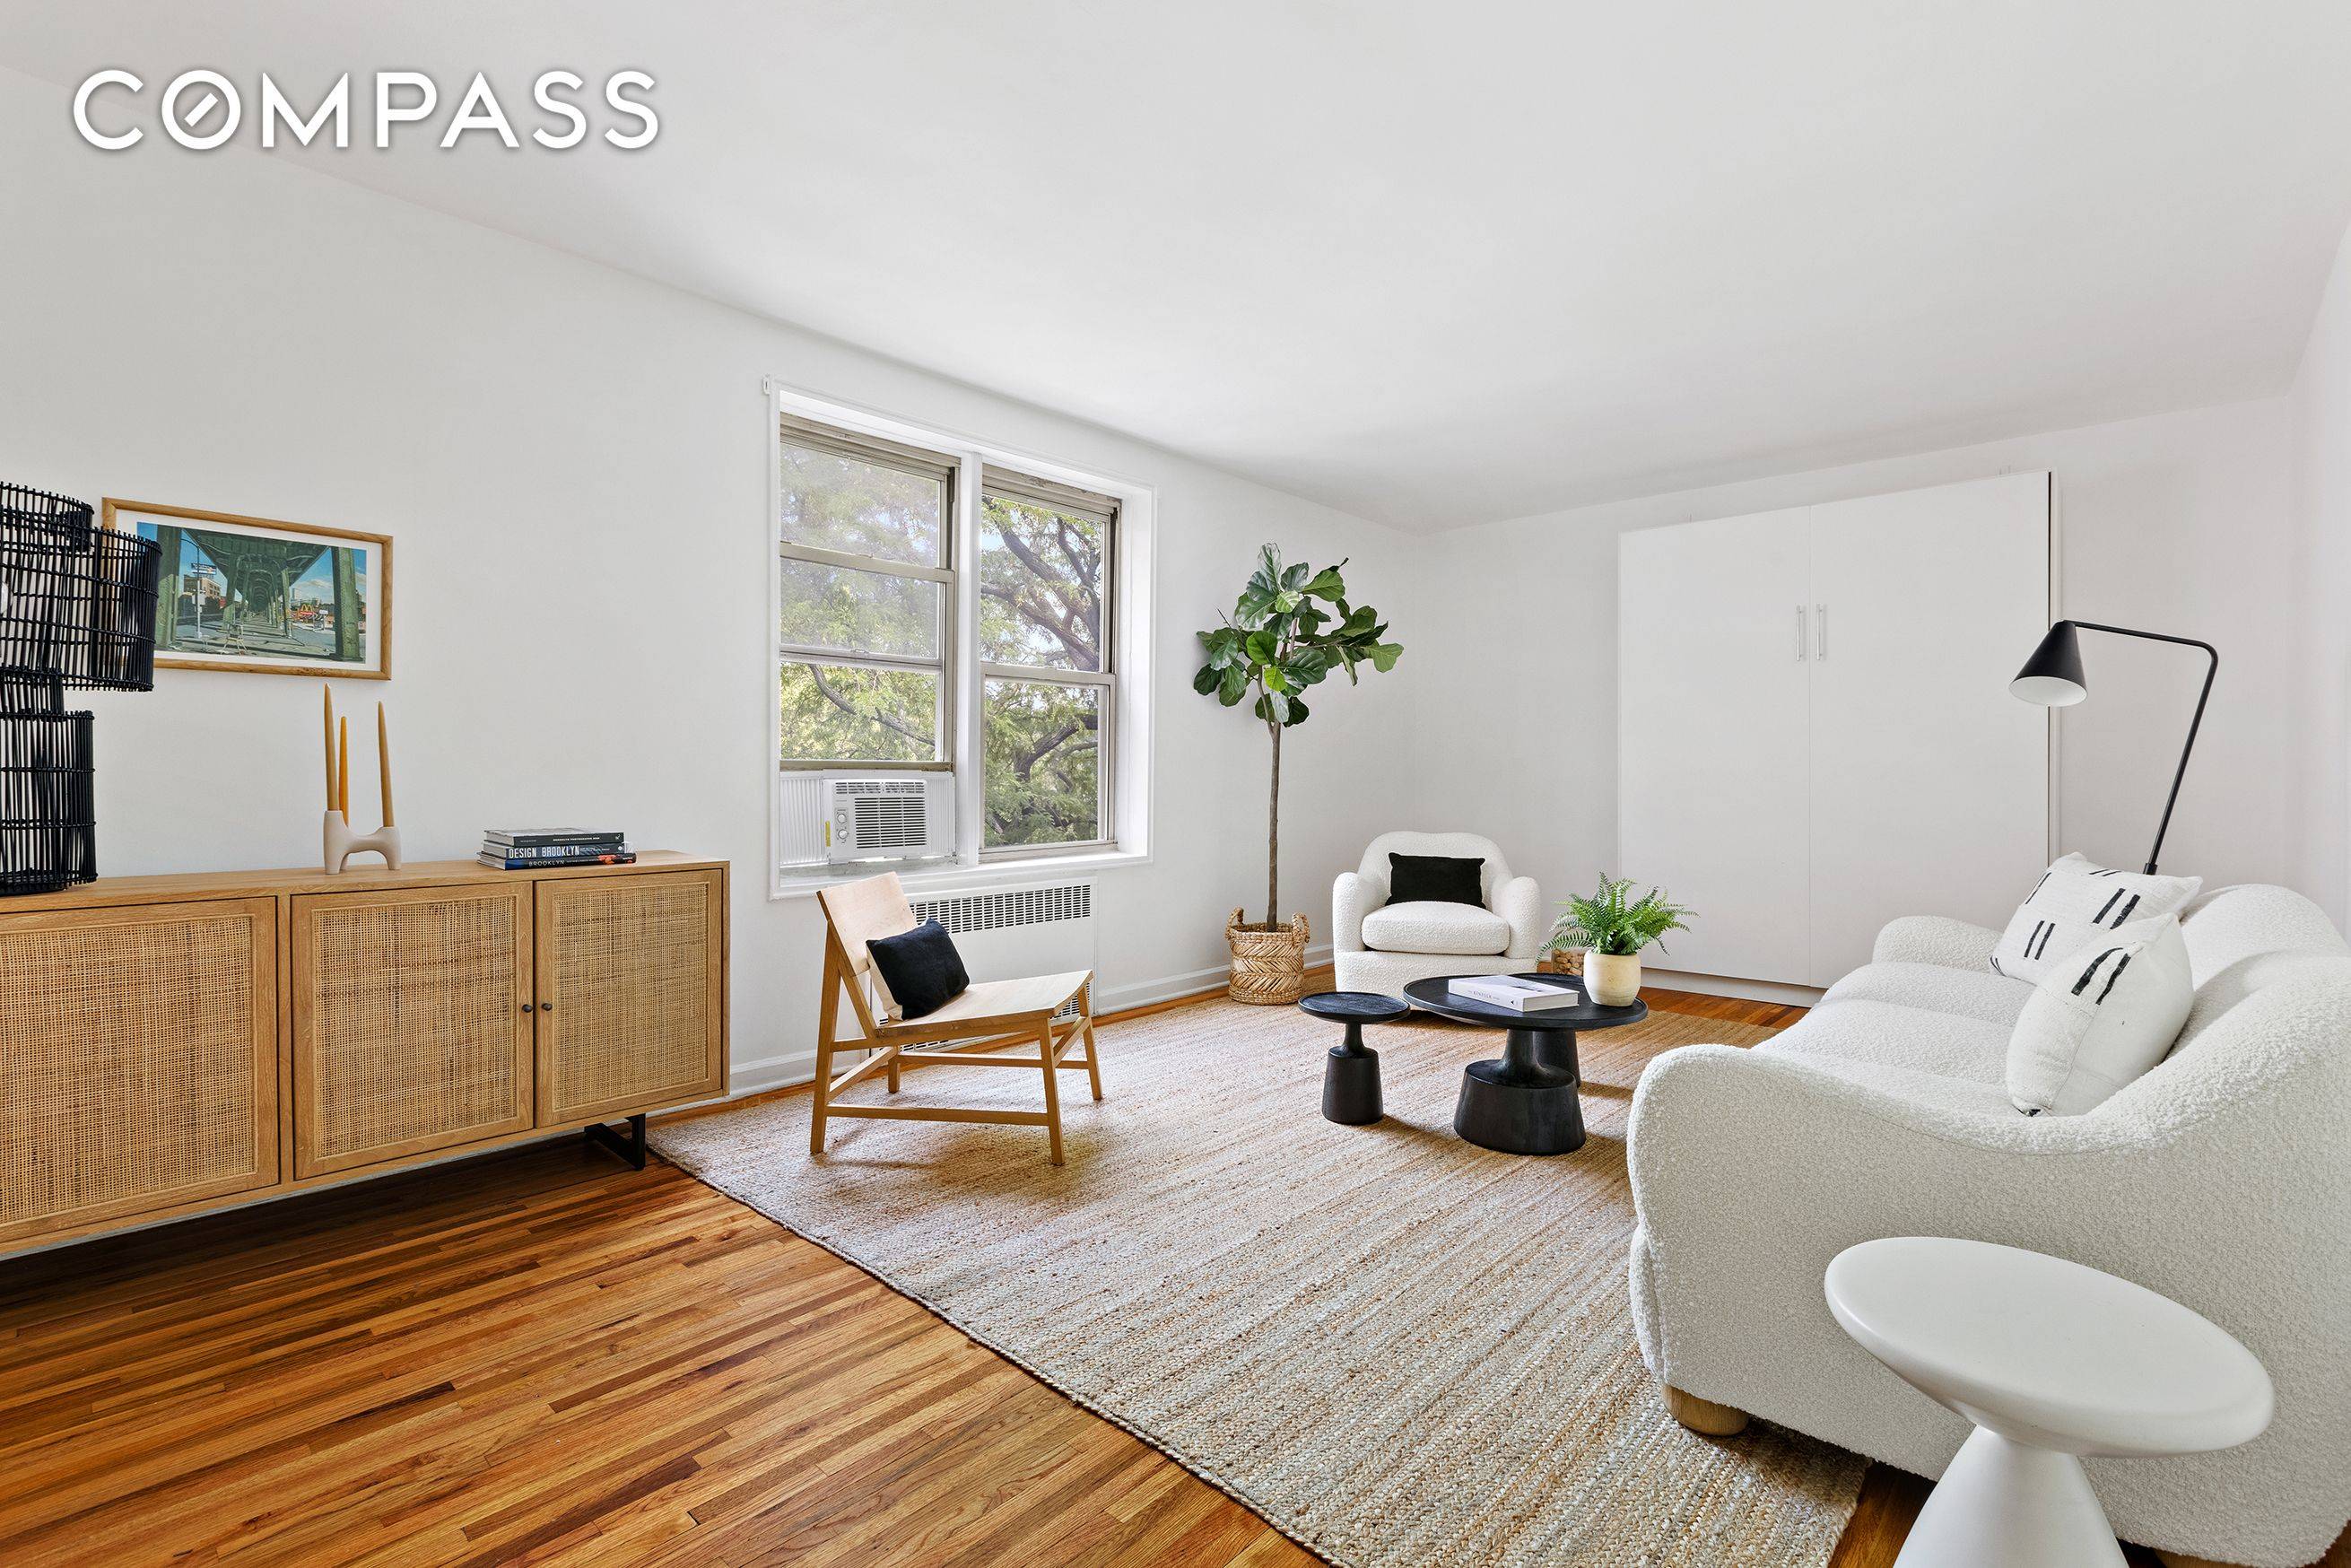 Expansive, finely renovated 2 bedroom apartment in prime Windsor Terrace, in an impeccably maintained elevator building located in one of Brooklyn s most prized neighborhoods.